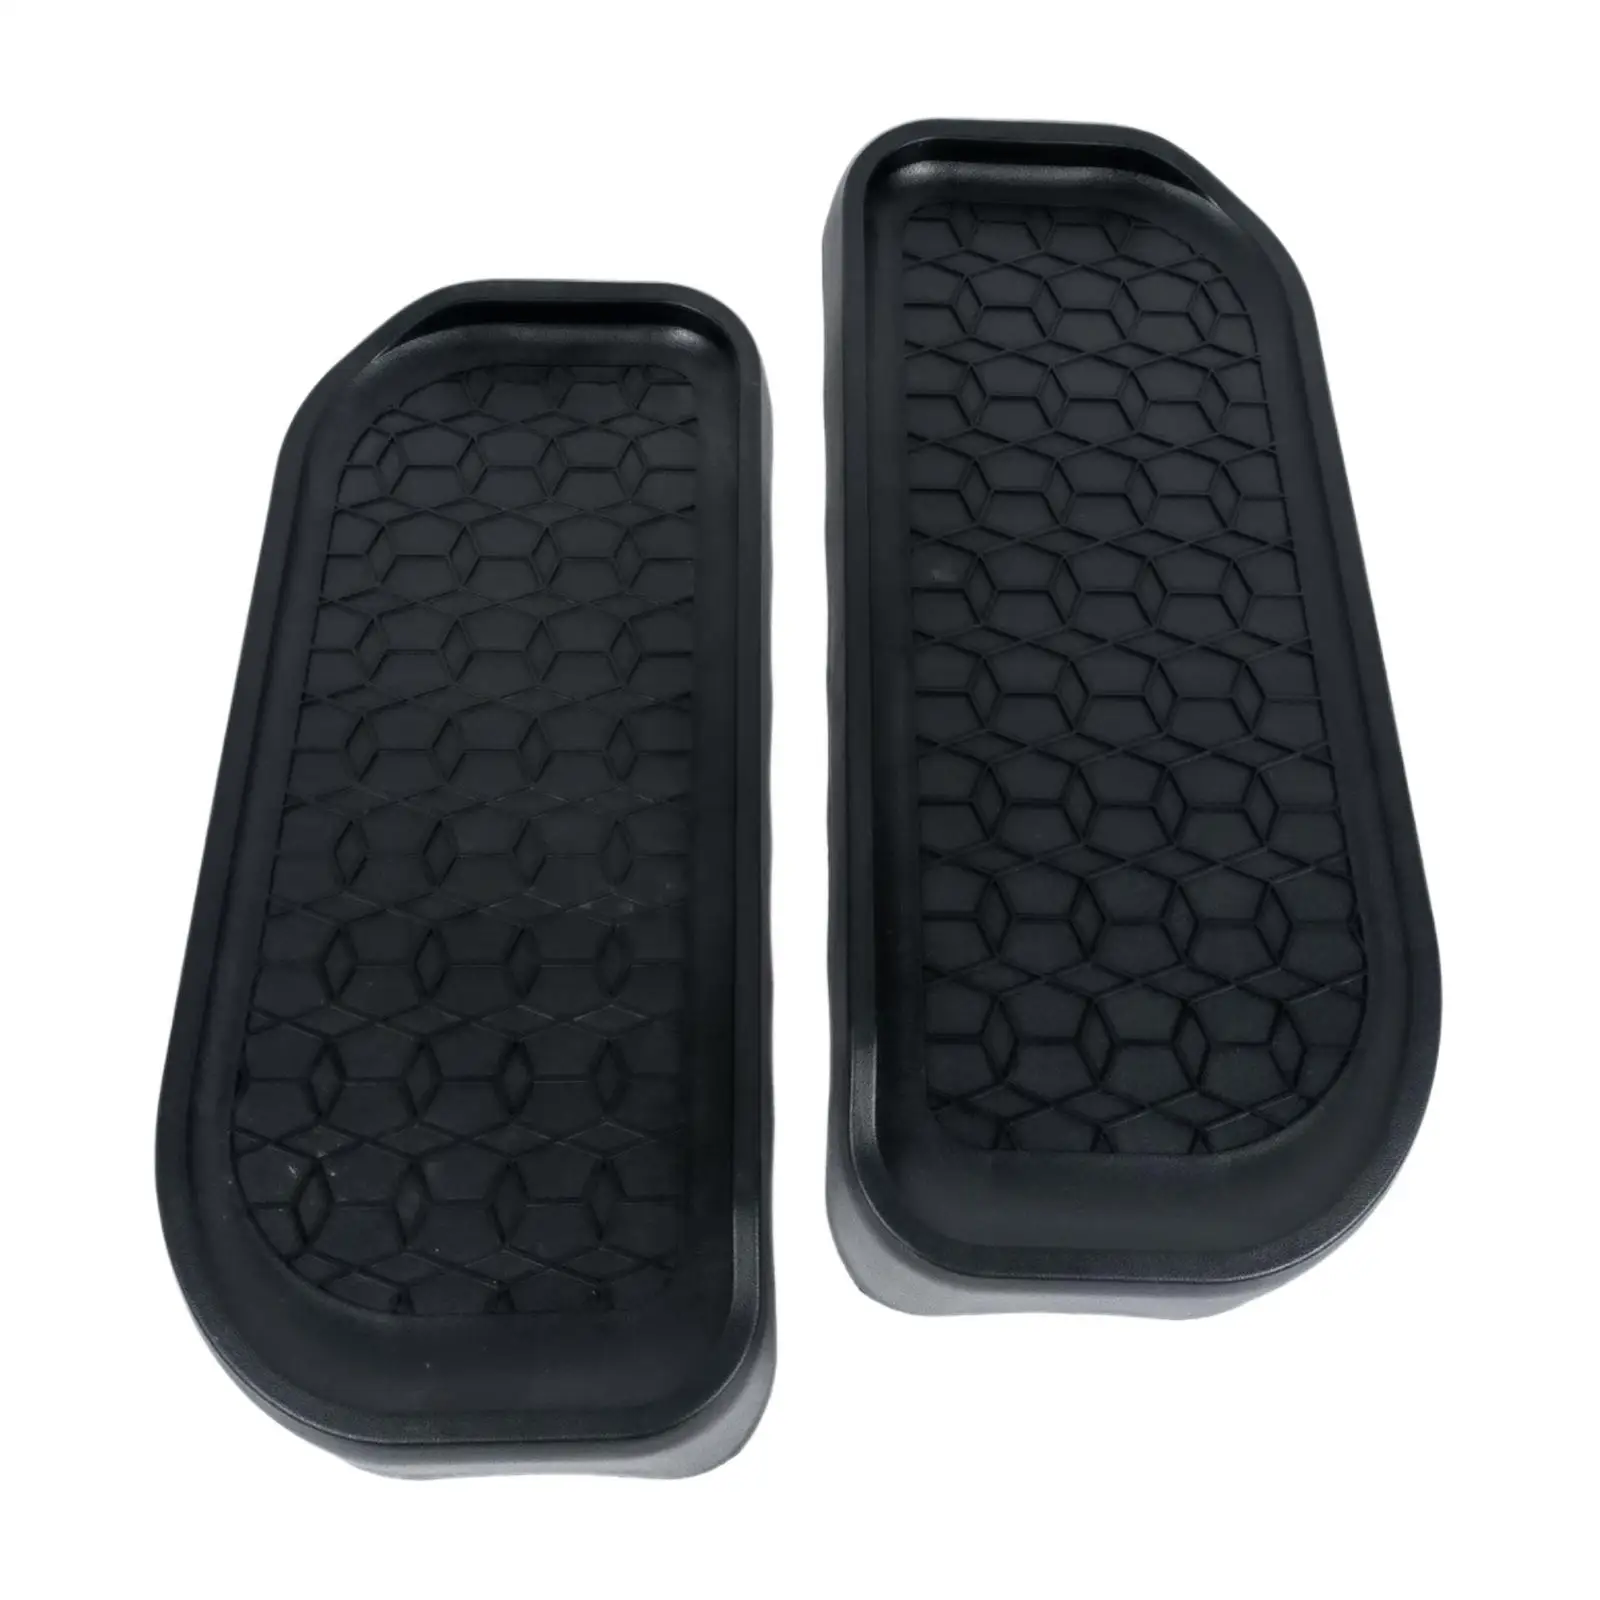 2Pcs Elliptical Machine Foot Pedals Leg Training Pedals Simple to Install